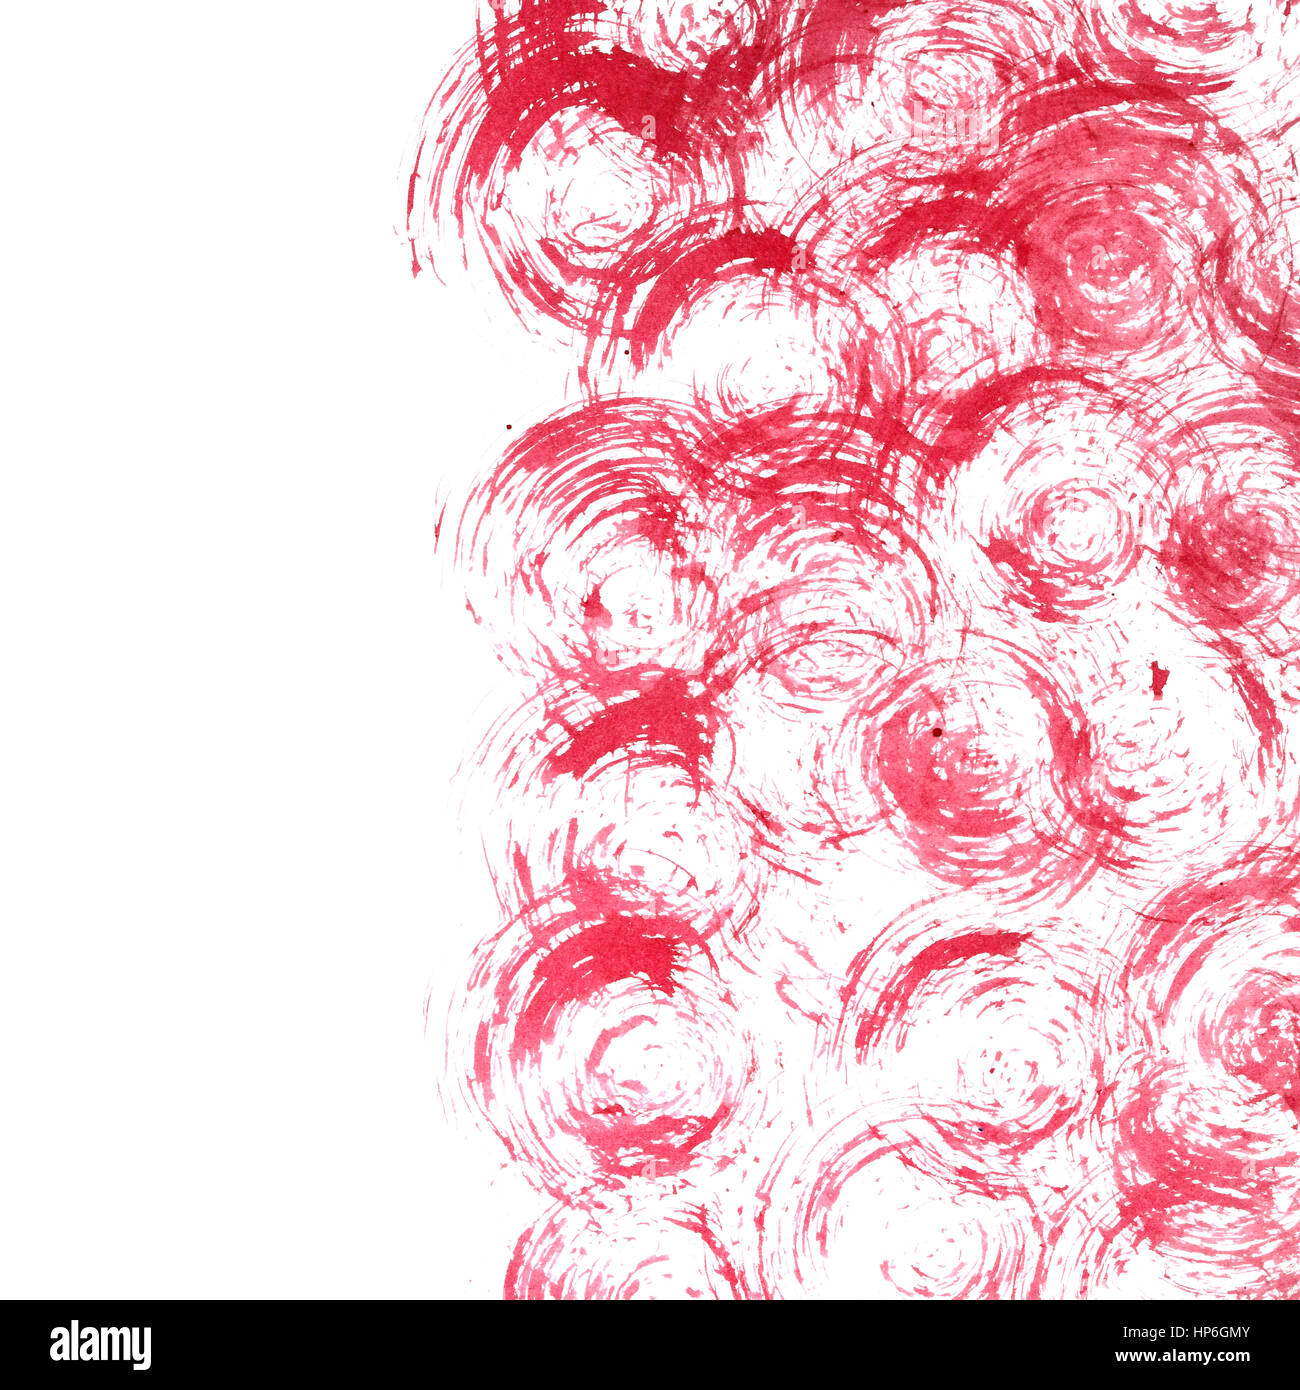 Red ink texture with curls over white background -- raster illustration Stock Photo